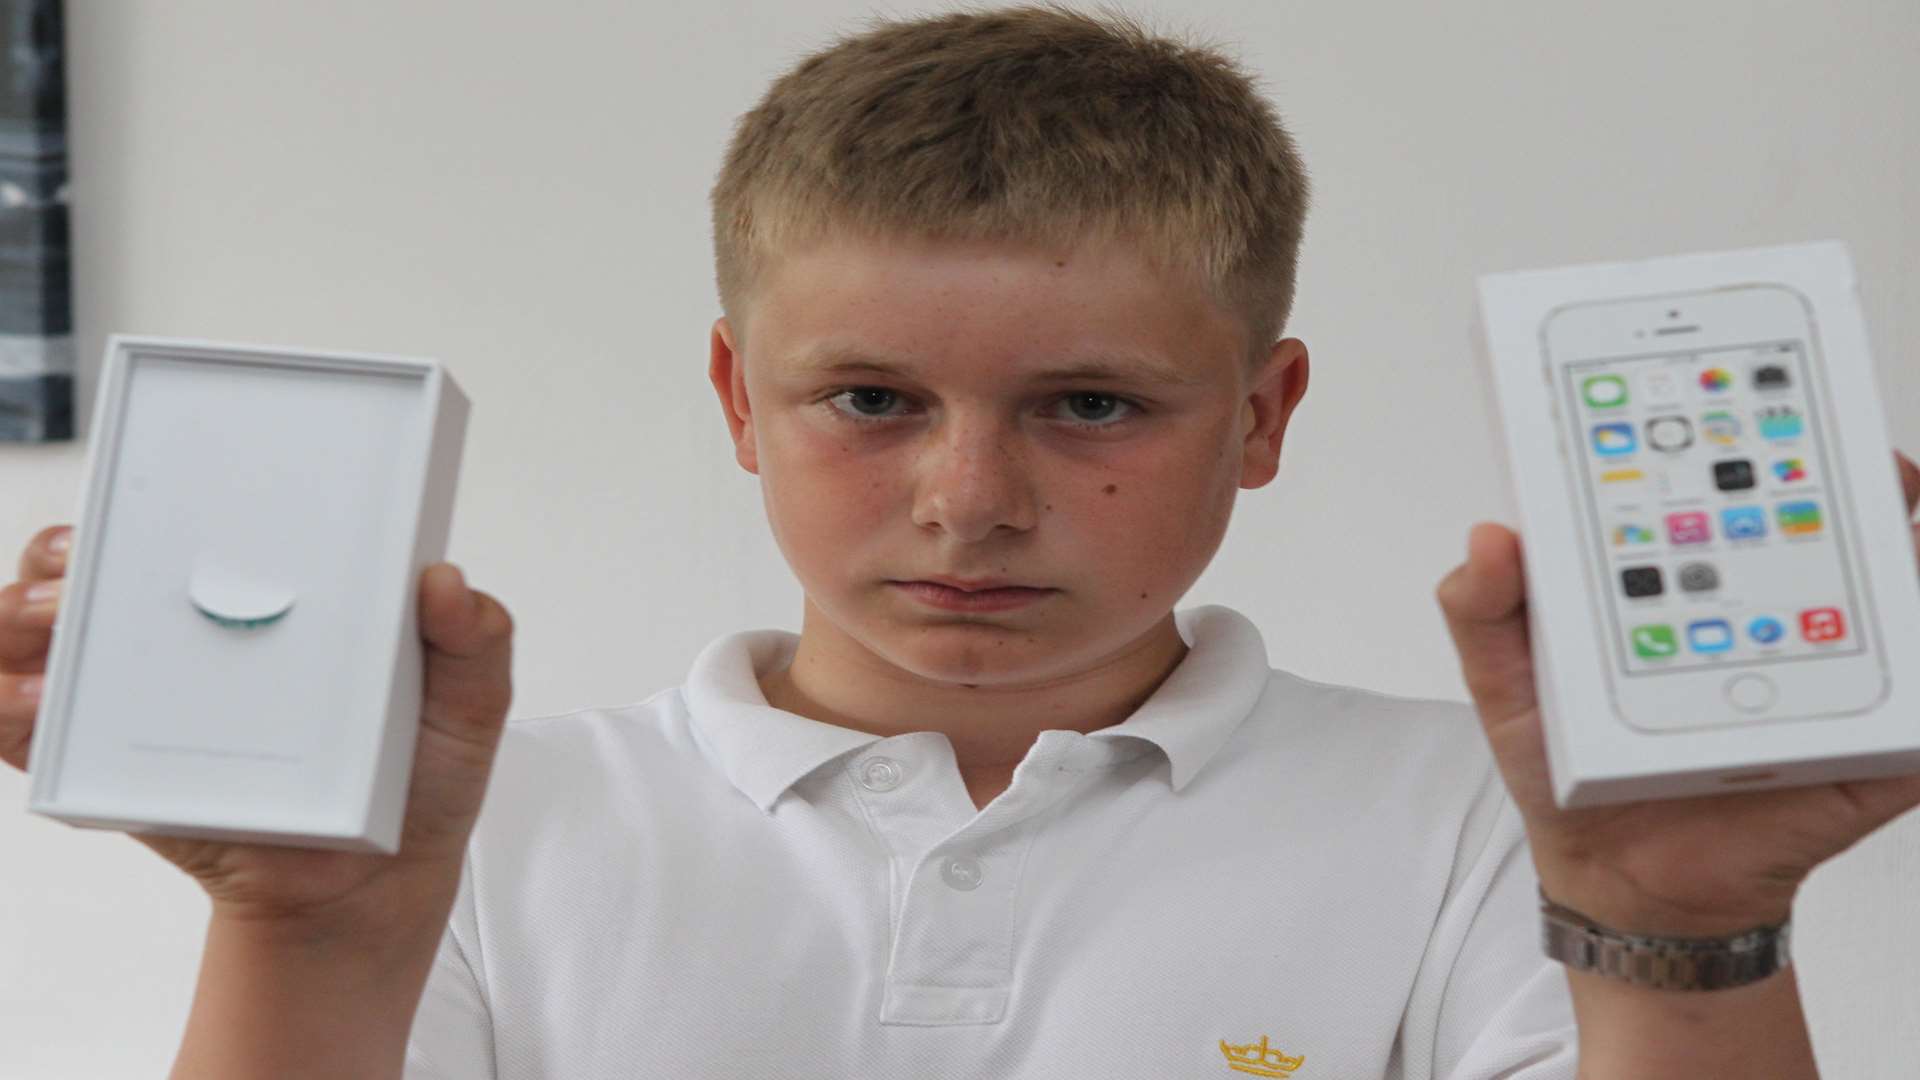 Michael Barnett, 13, with his empty iPhone box. Picture: John Westhrop